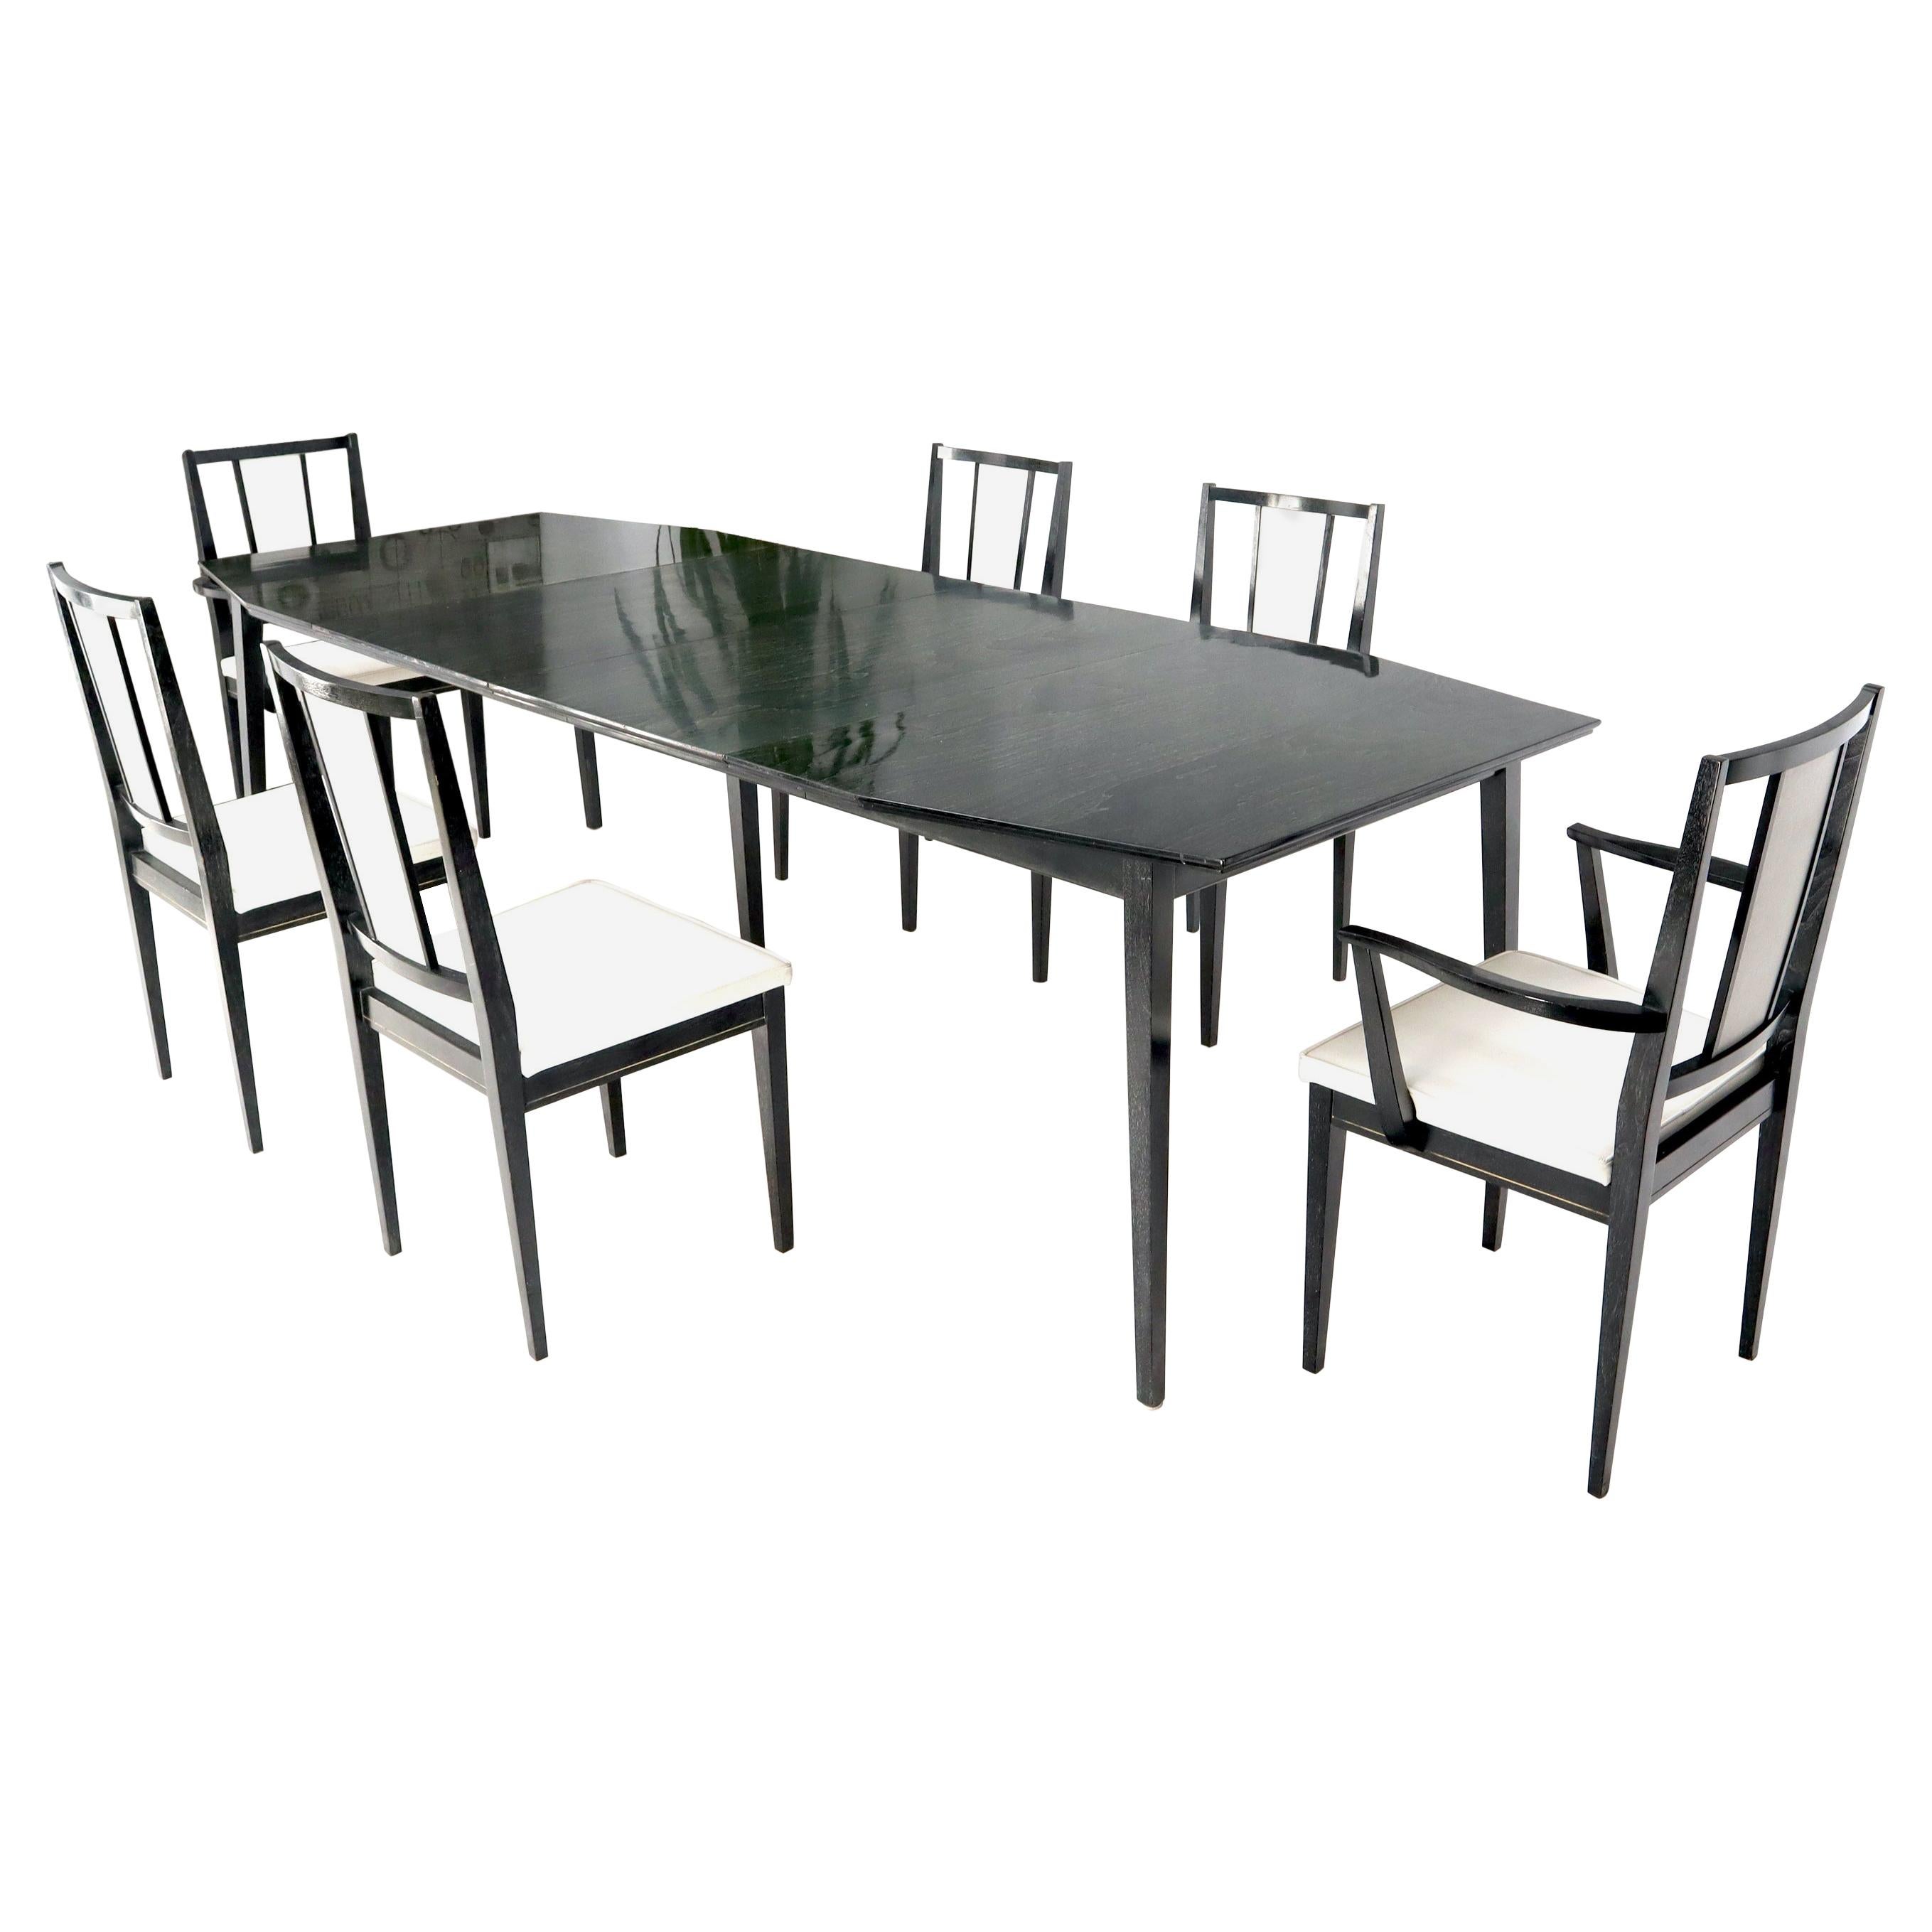 Cerused Ebonized Walnut Dining Room Table 6 Chairs Set w/ Two Extension Boards For Sale